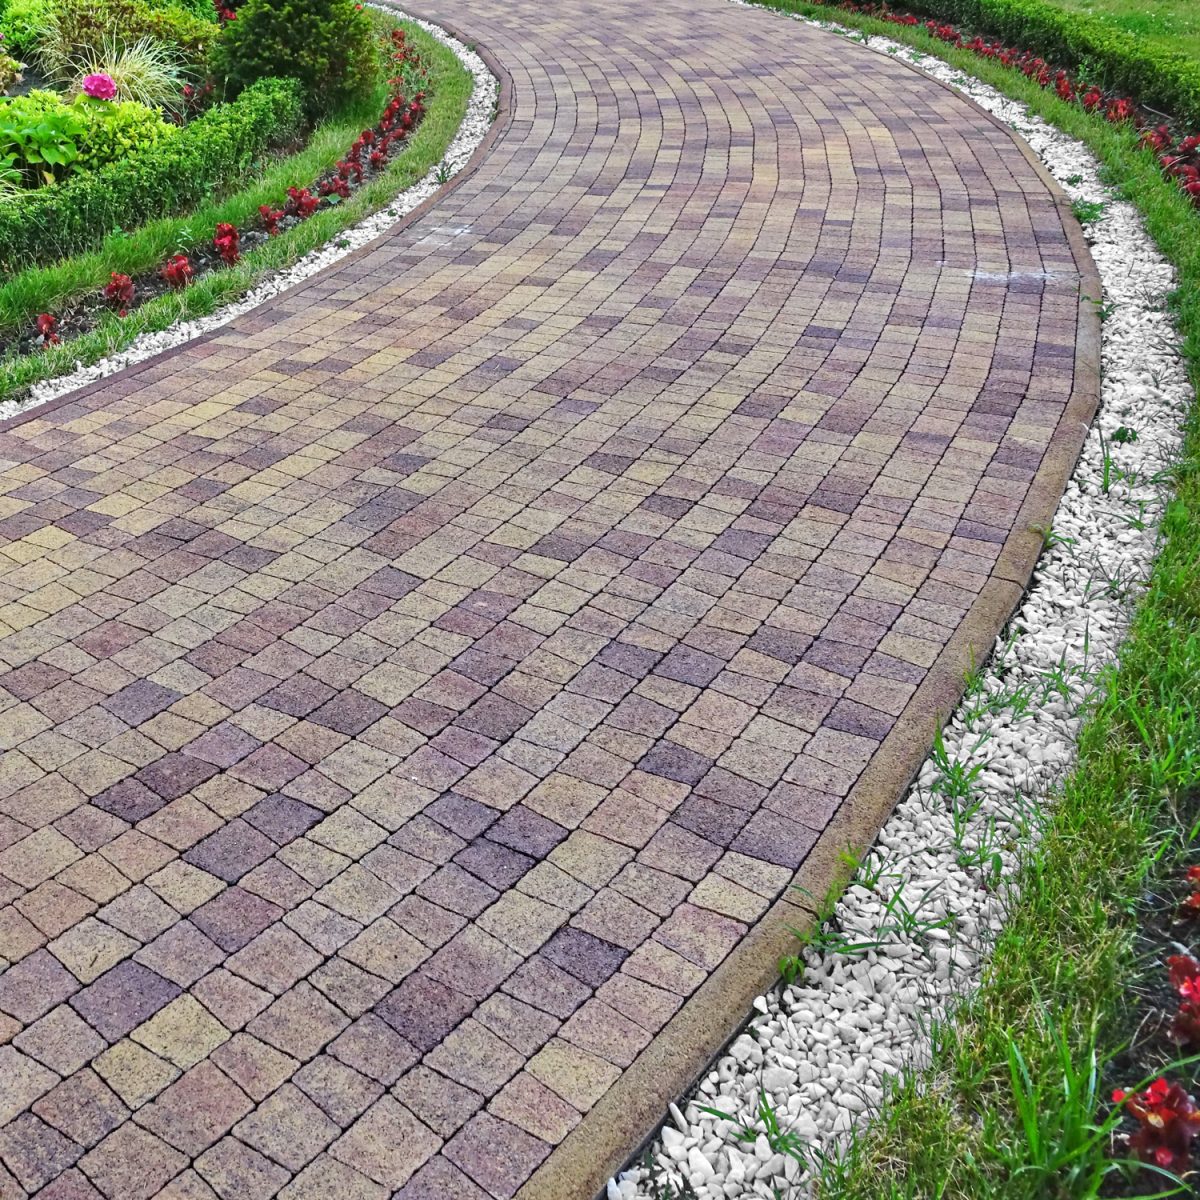 Modern Ornamental Garden Landscape With Tiled Colorful Mosaic Cobblestone Paving. Marble White Gravel Along Walkway